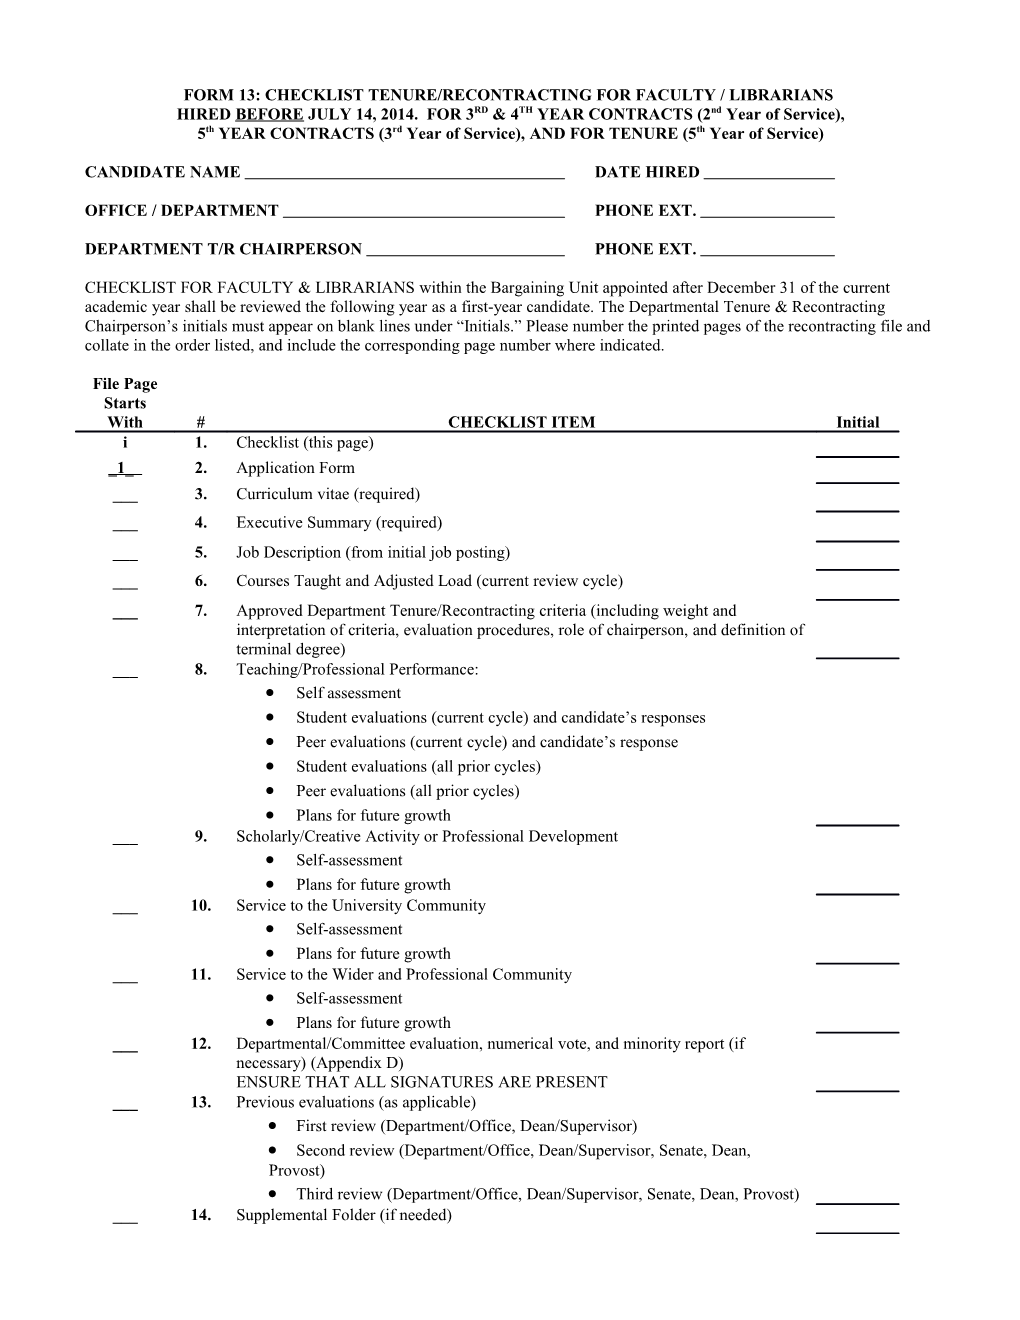 Form 13 : Checklist Tenure/Recontracting for Faculty / Librarians